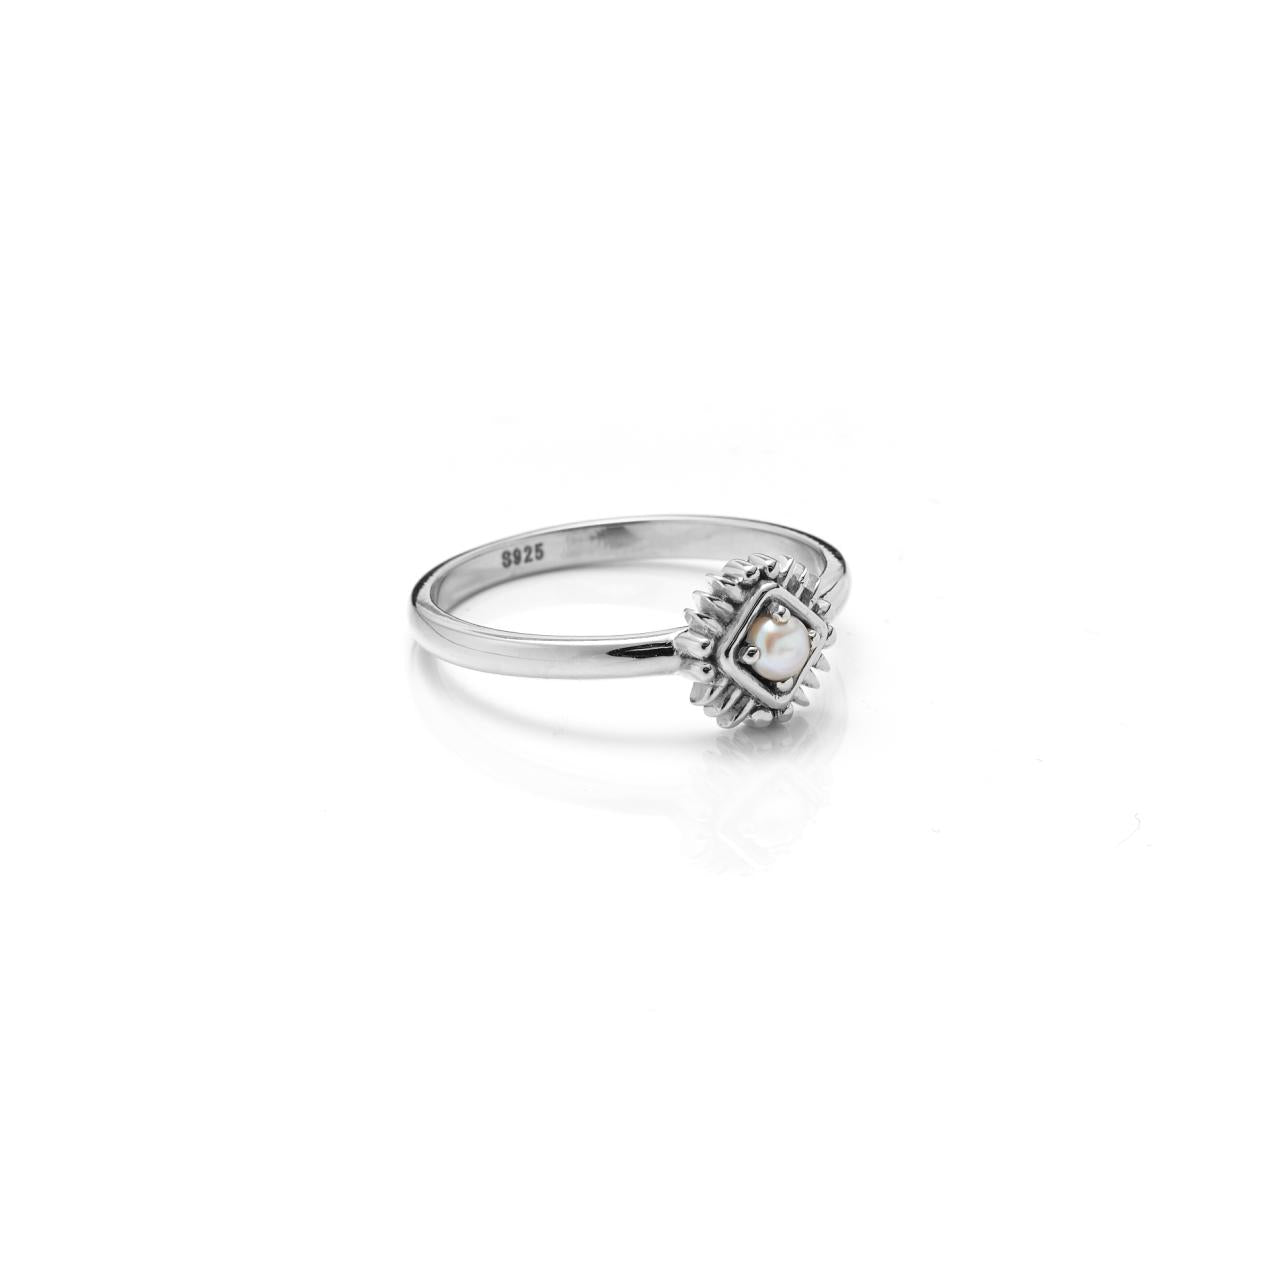 Petite Perle Ring - SSRP - (US Size 7)